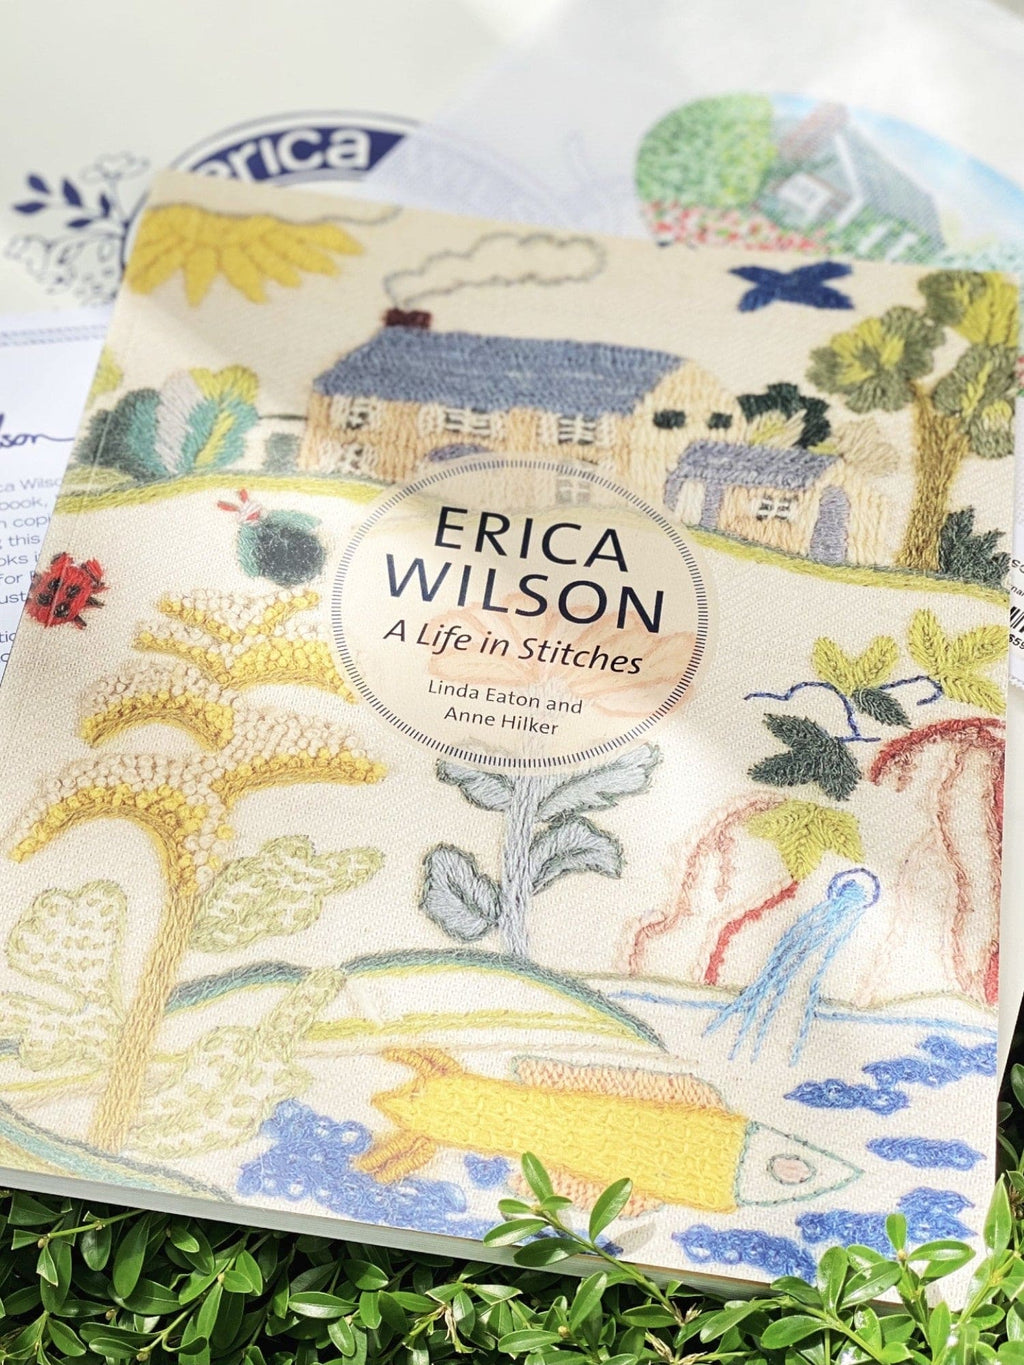 Erica Wilson "A Life in Stitches"